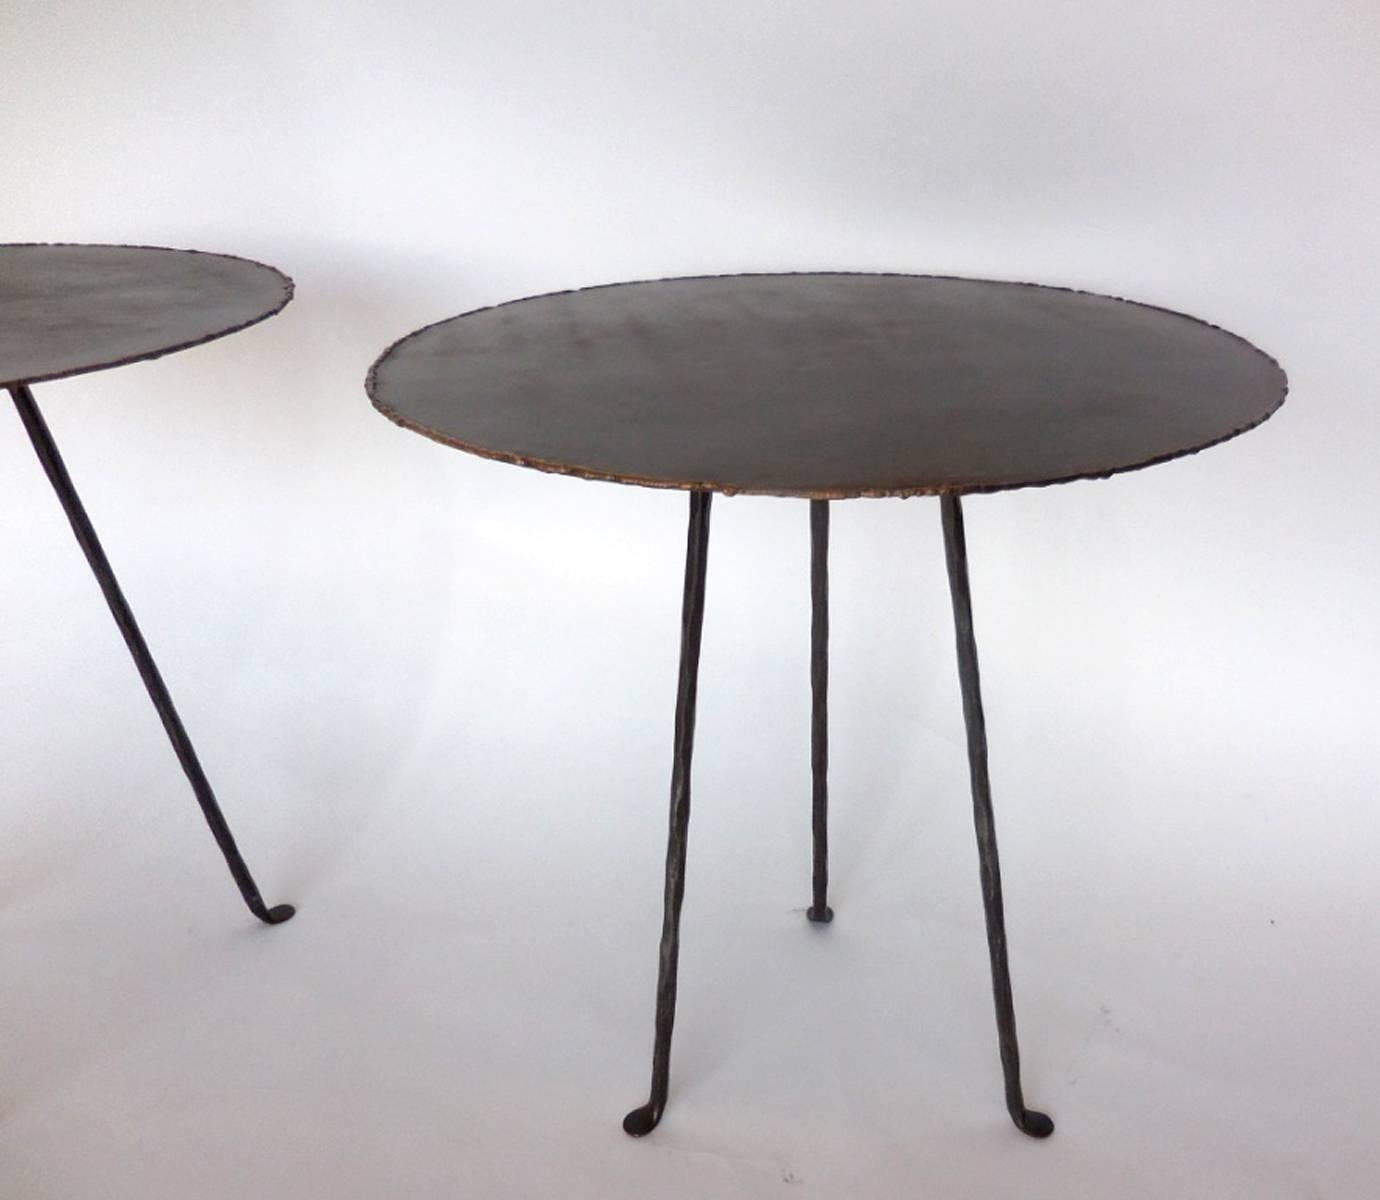 American Hand-Forged Iron and Bronze Tripod Table by Dos Gallos Studio For Sale